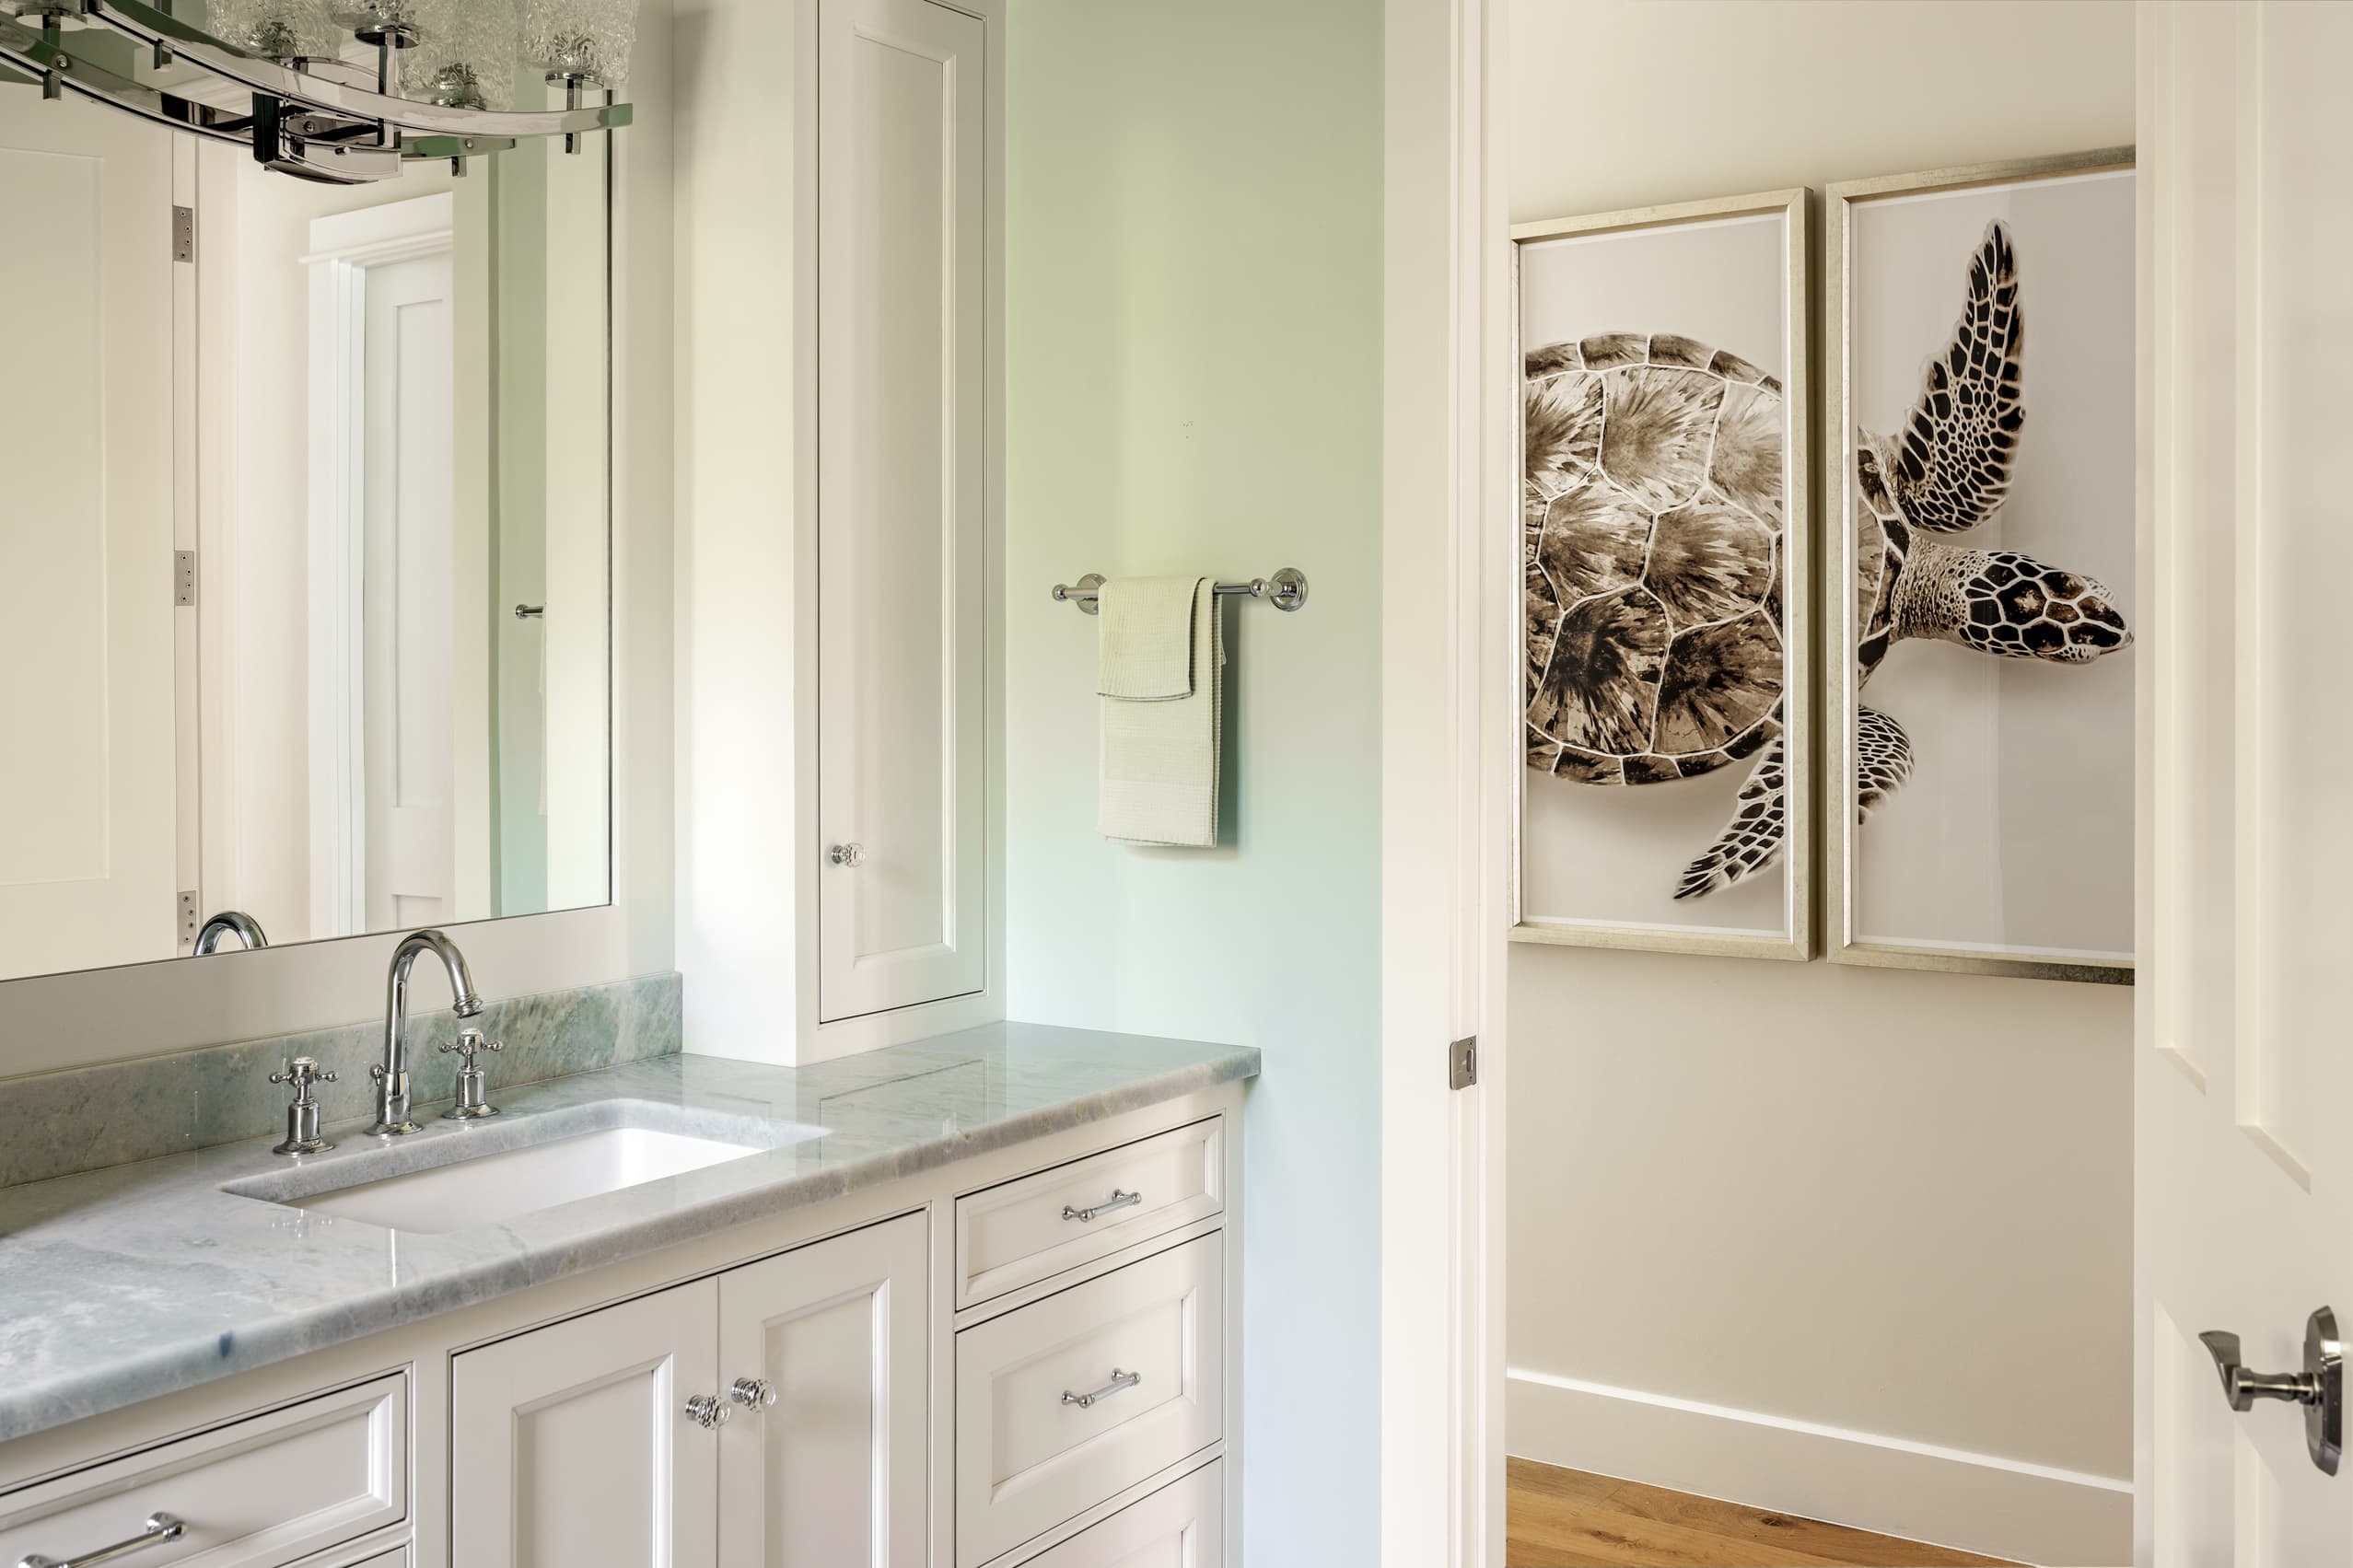 Light Blue Bathroom Sink White Cabinets And Turtle Picture Frames